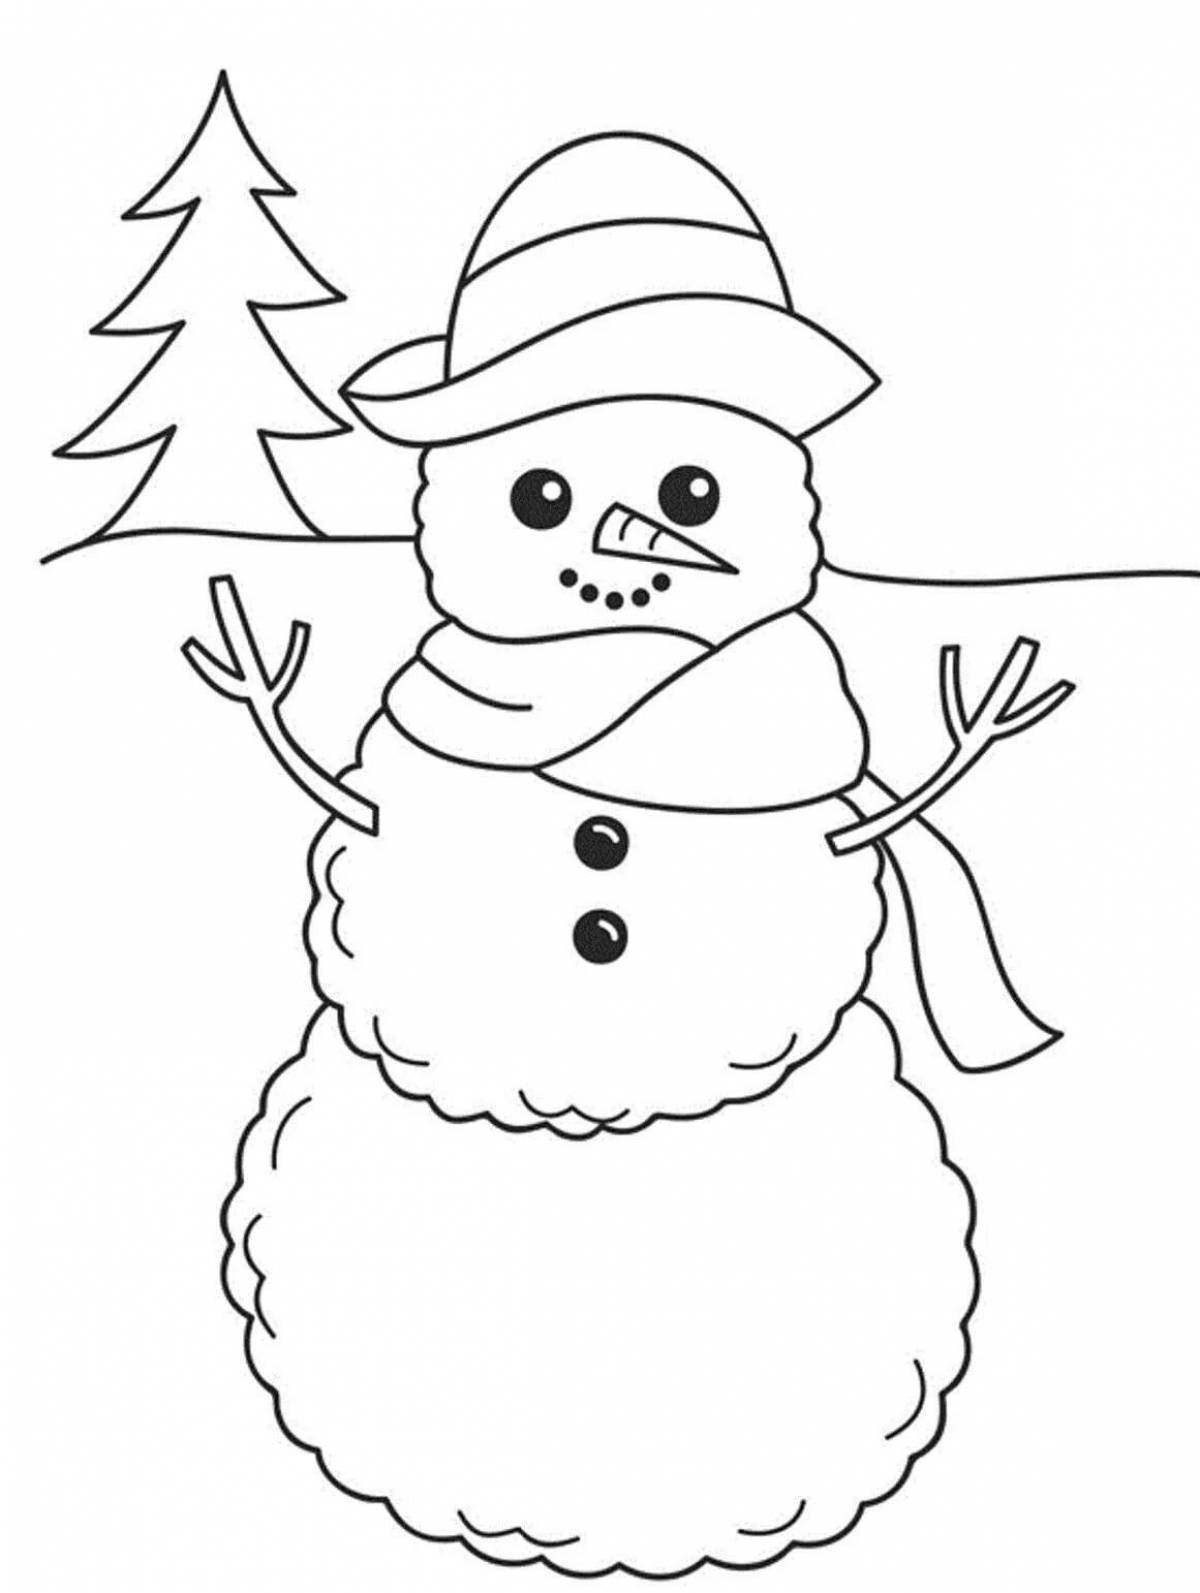 Playful snowman coloring book for 5 year olds